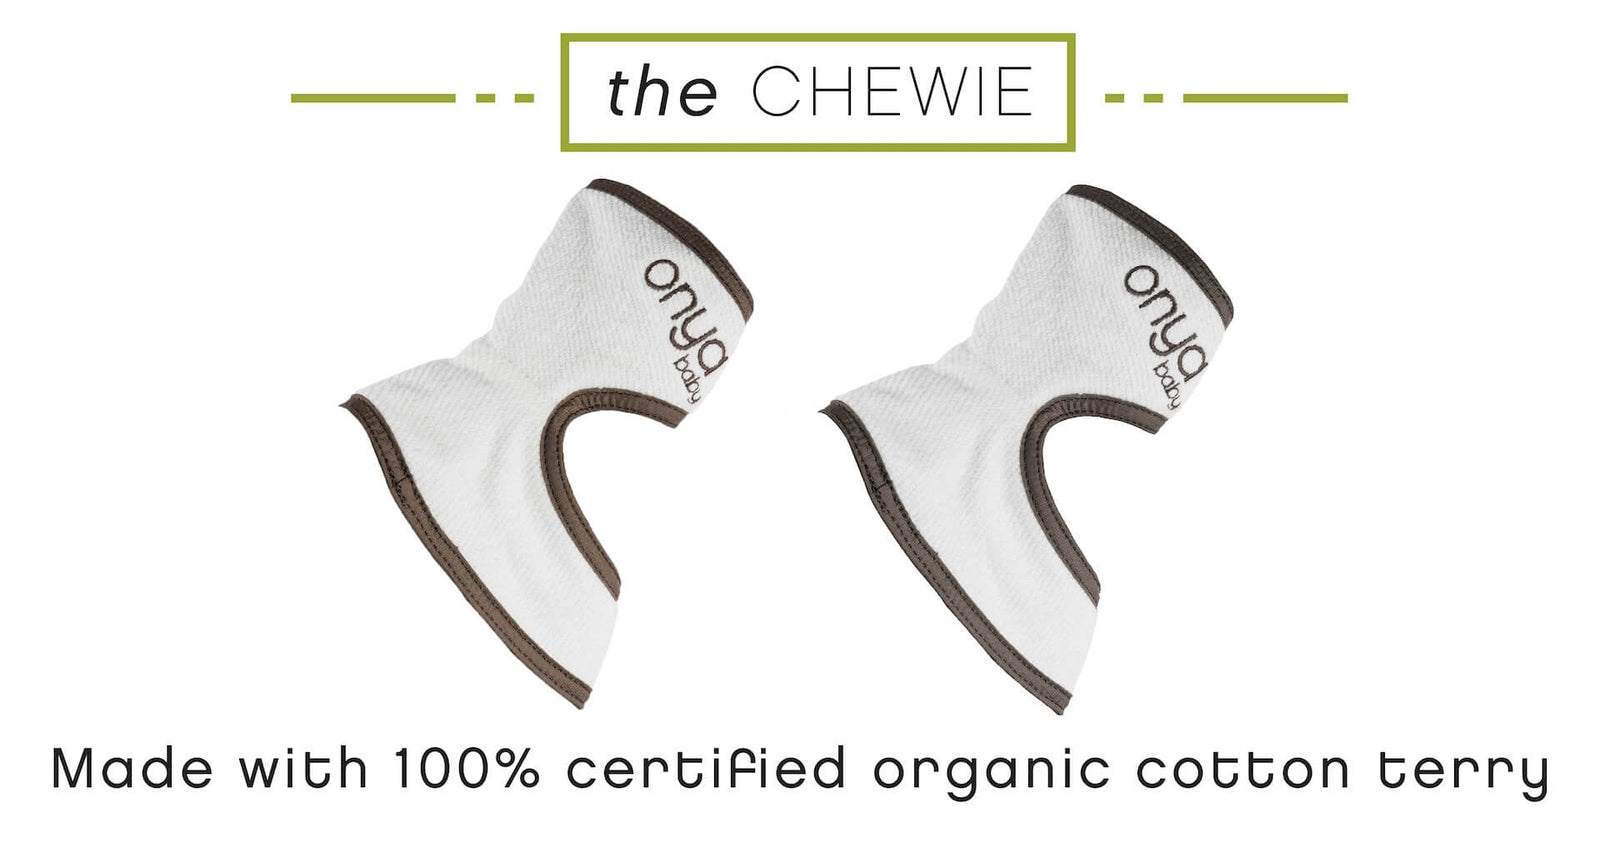 Product display showing all color variations of the Chewie Teething Pads by Onya Baby